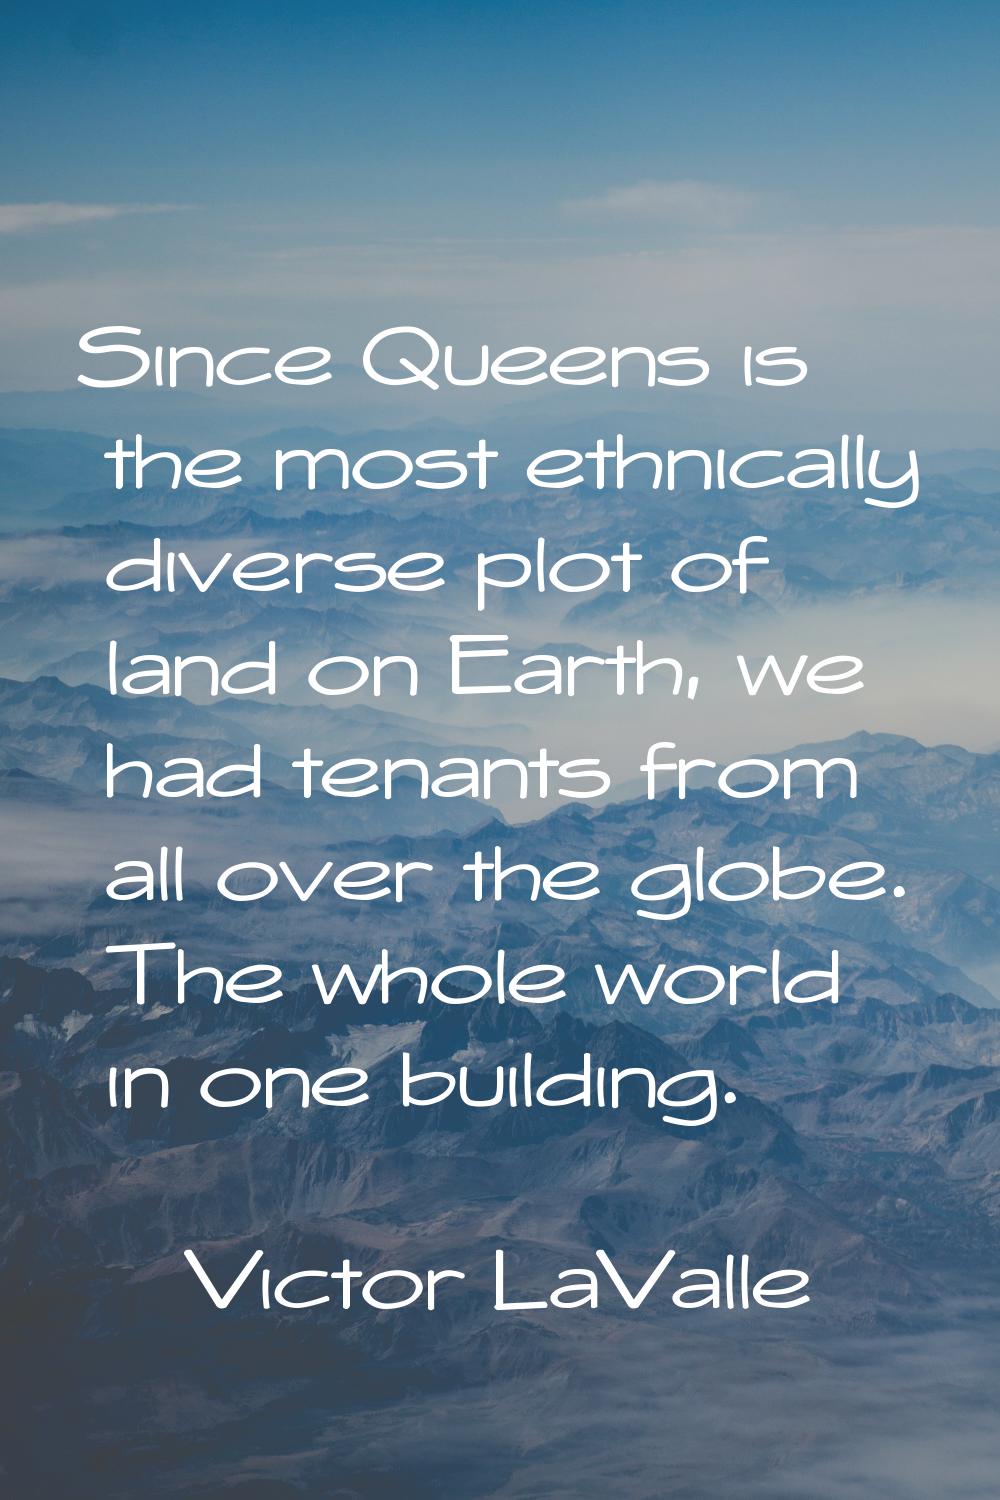 Since Queens is the most ethnically diverse plot of land on Earth, we had tenants from all over the